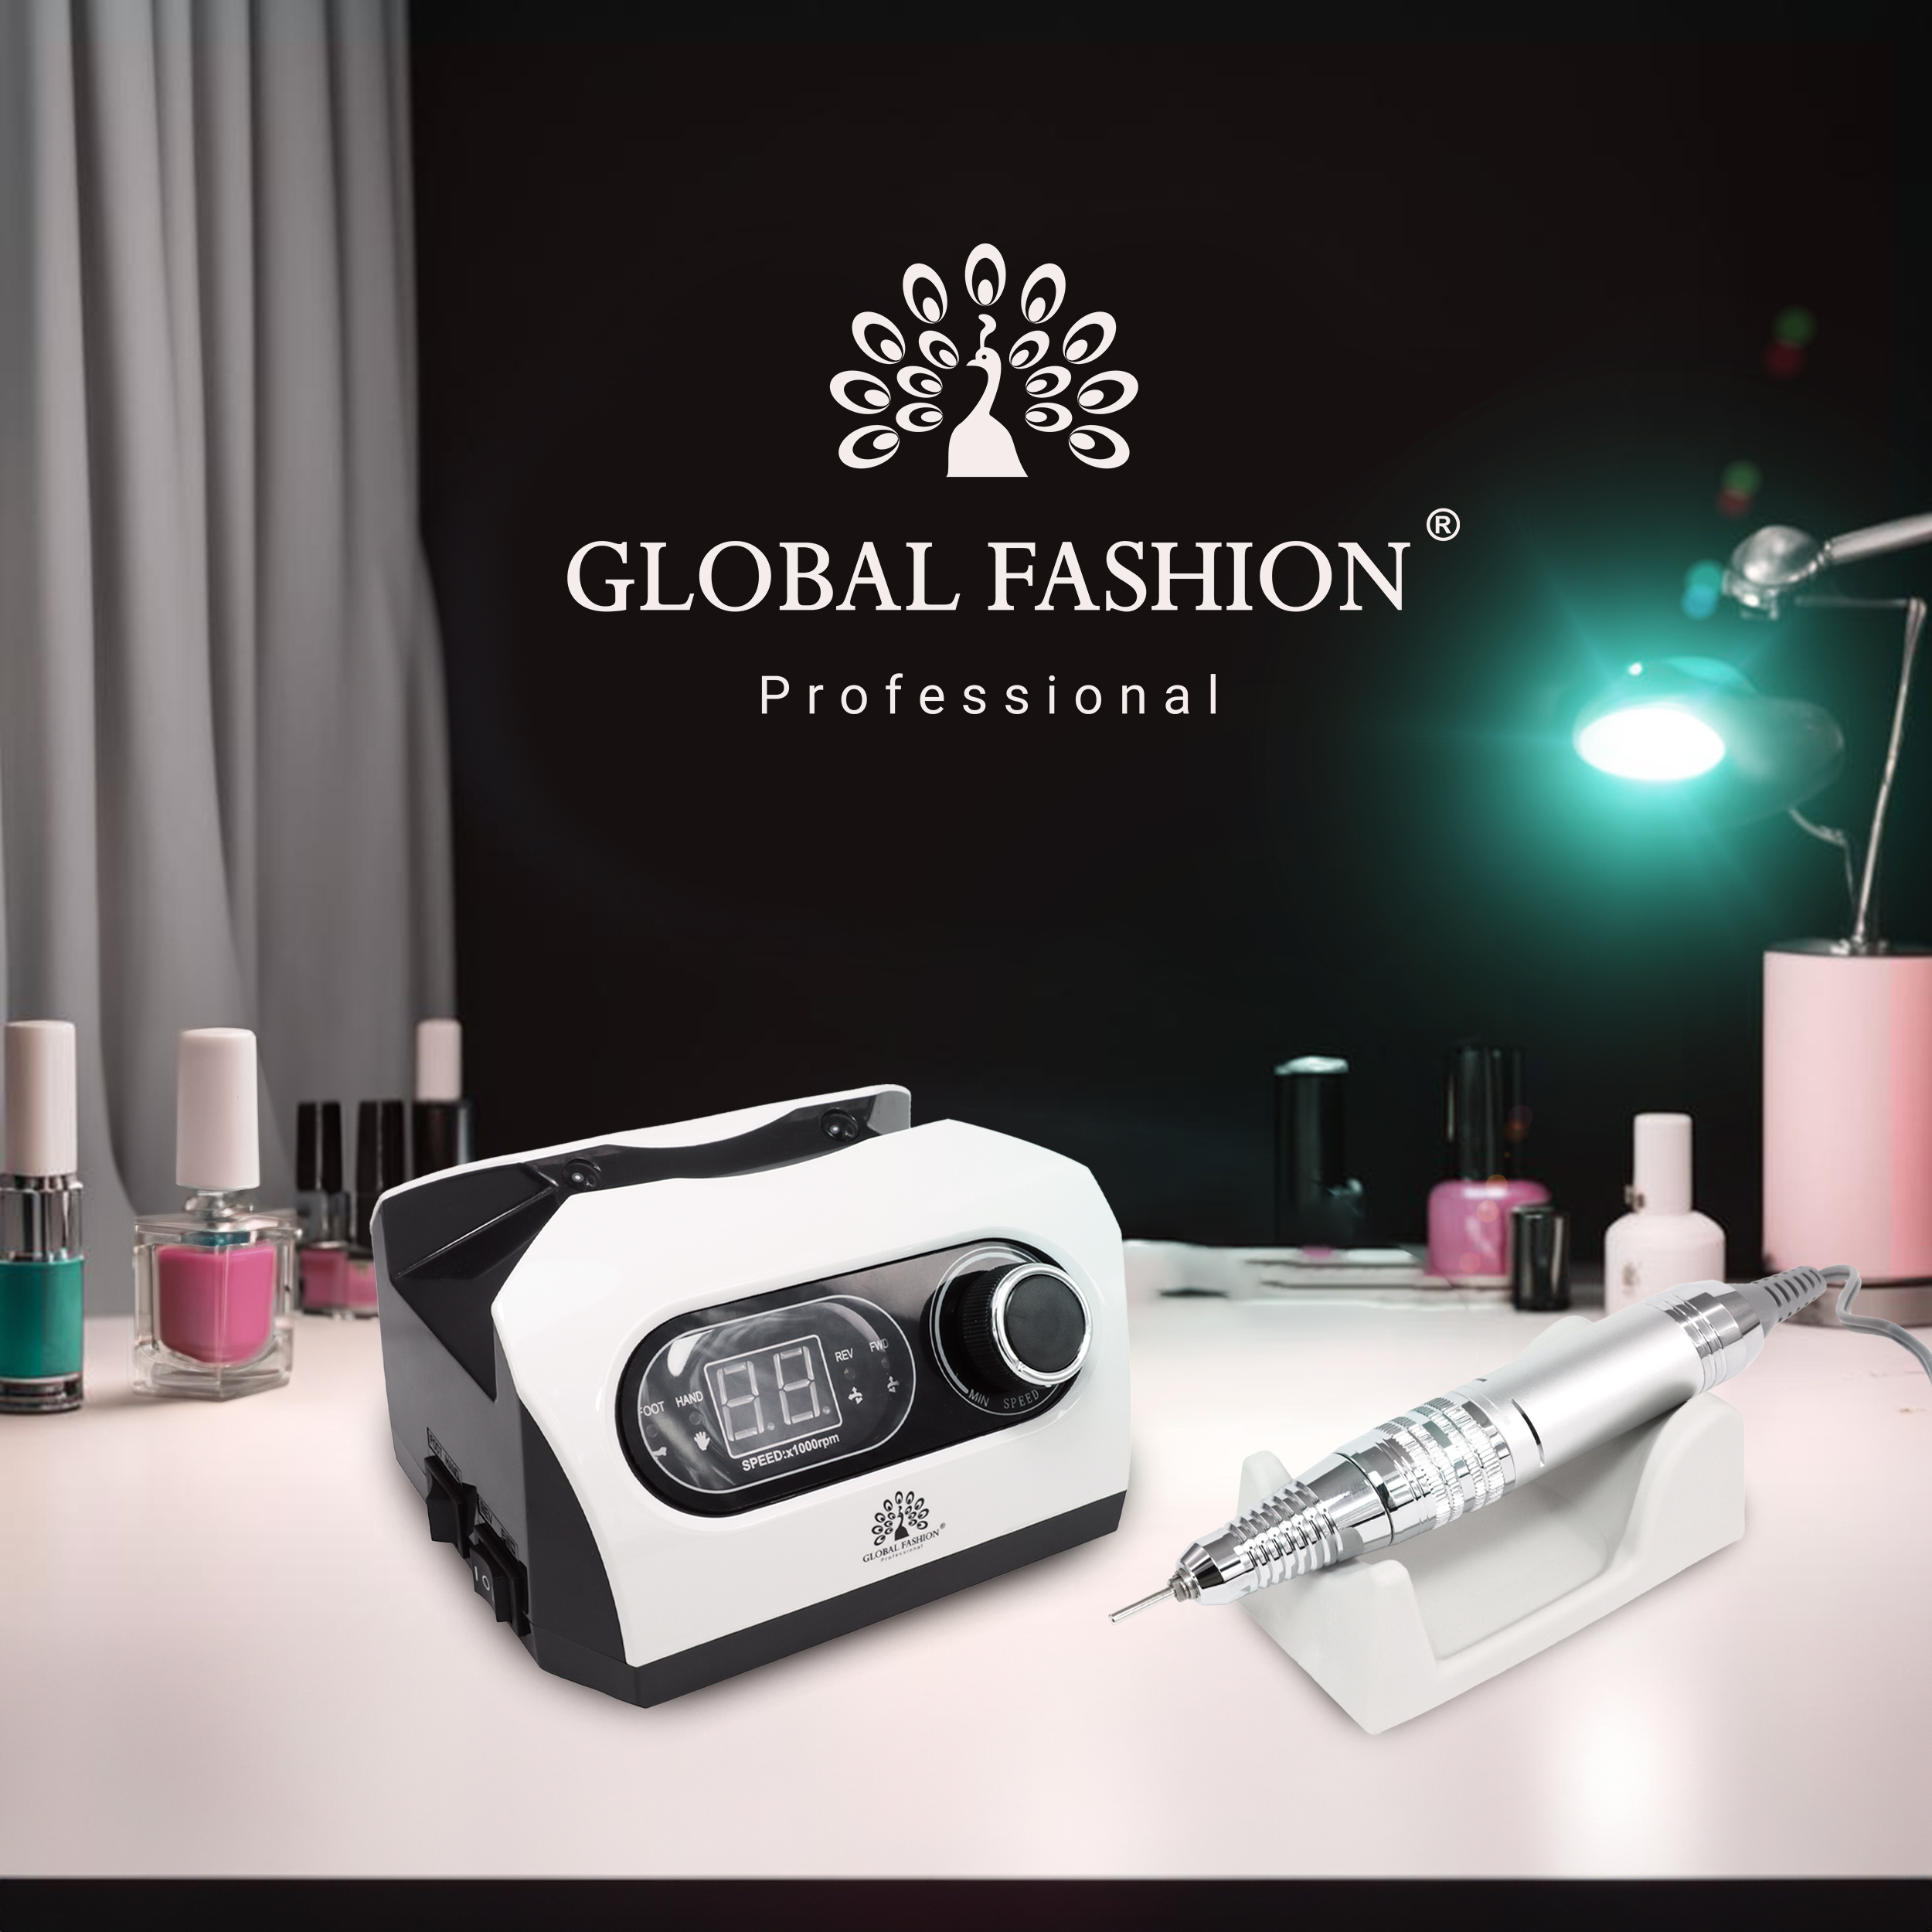 Electric nail drill ZS-717 Global Fashion 80W 50000 rpm - high quality at a good price